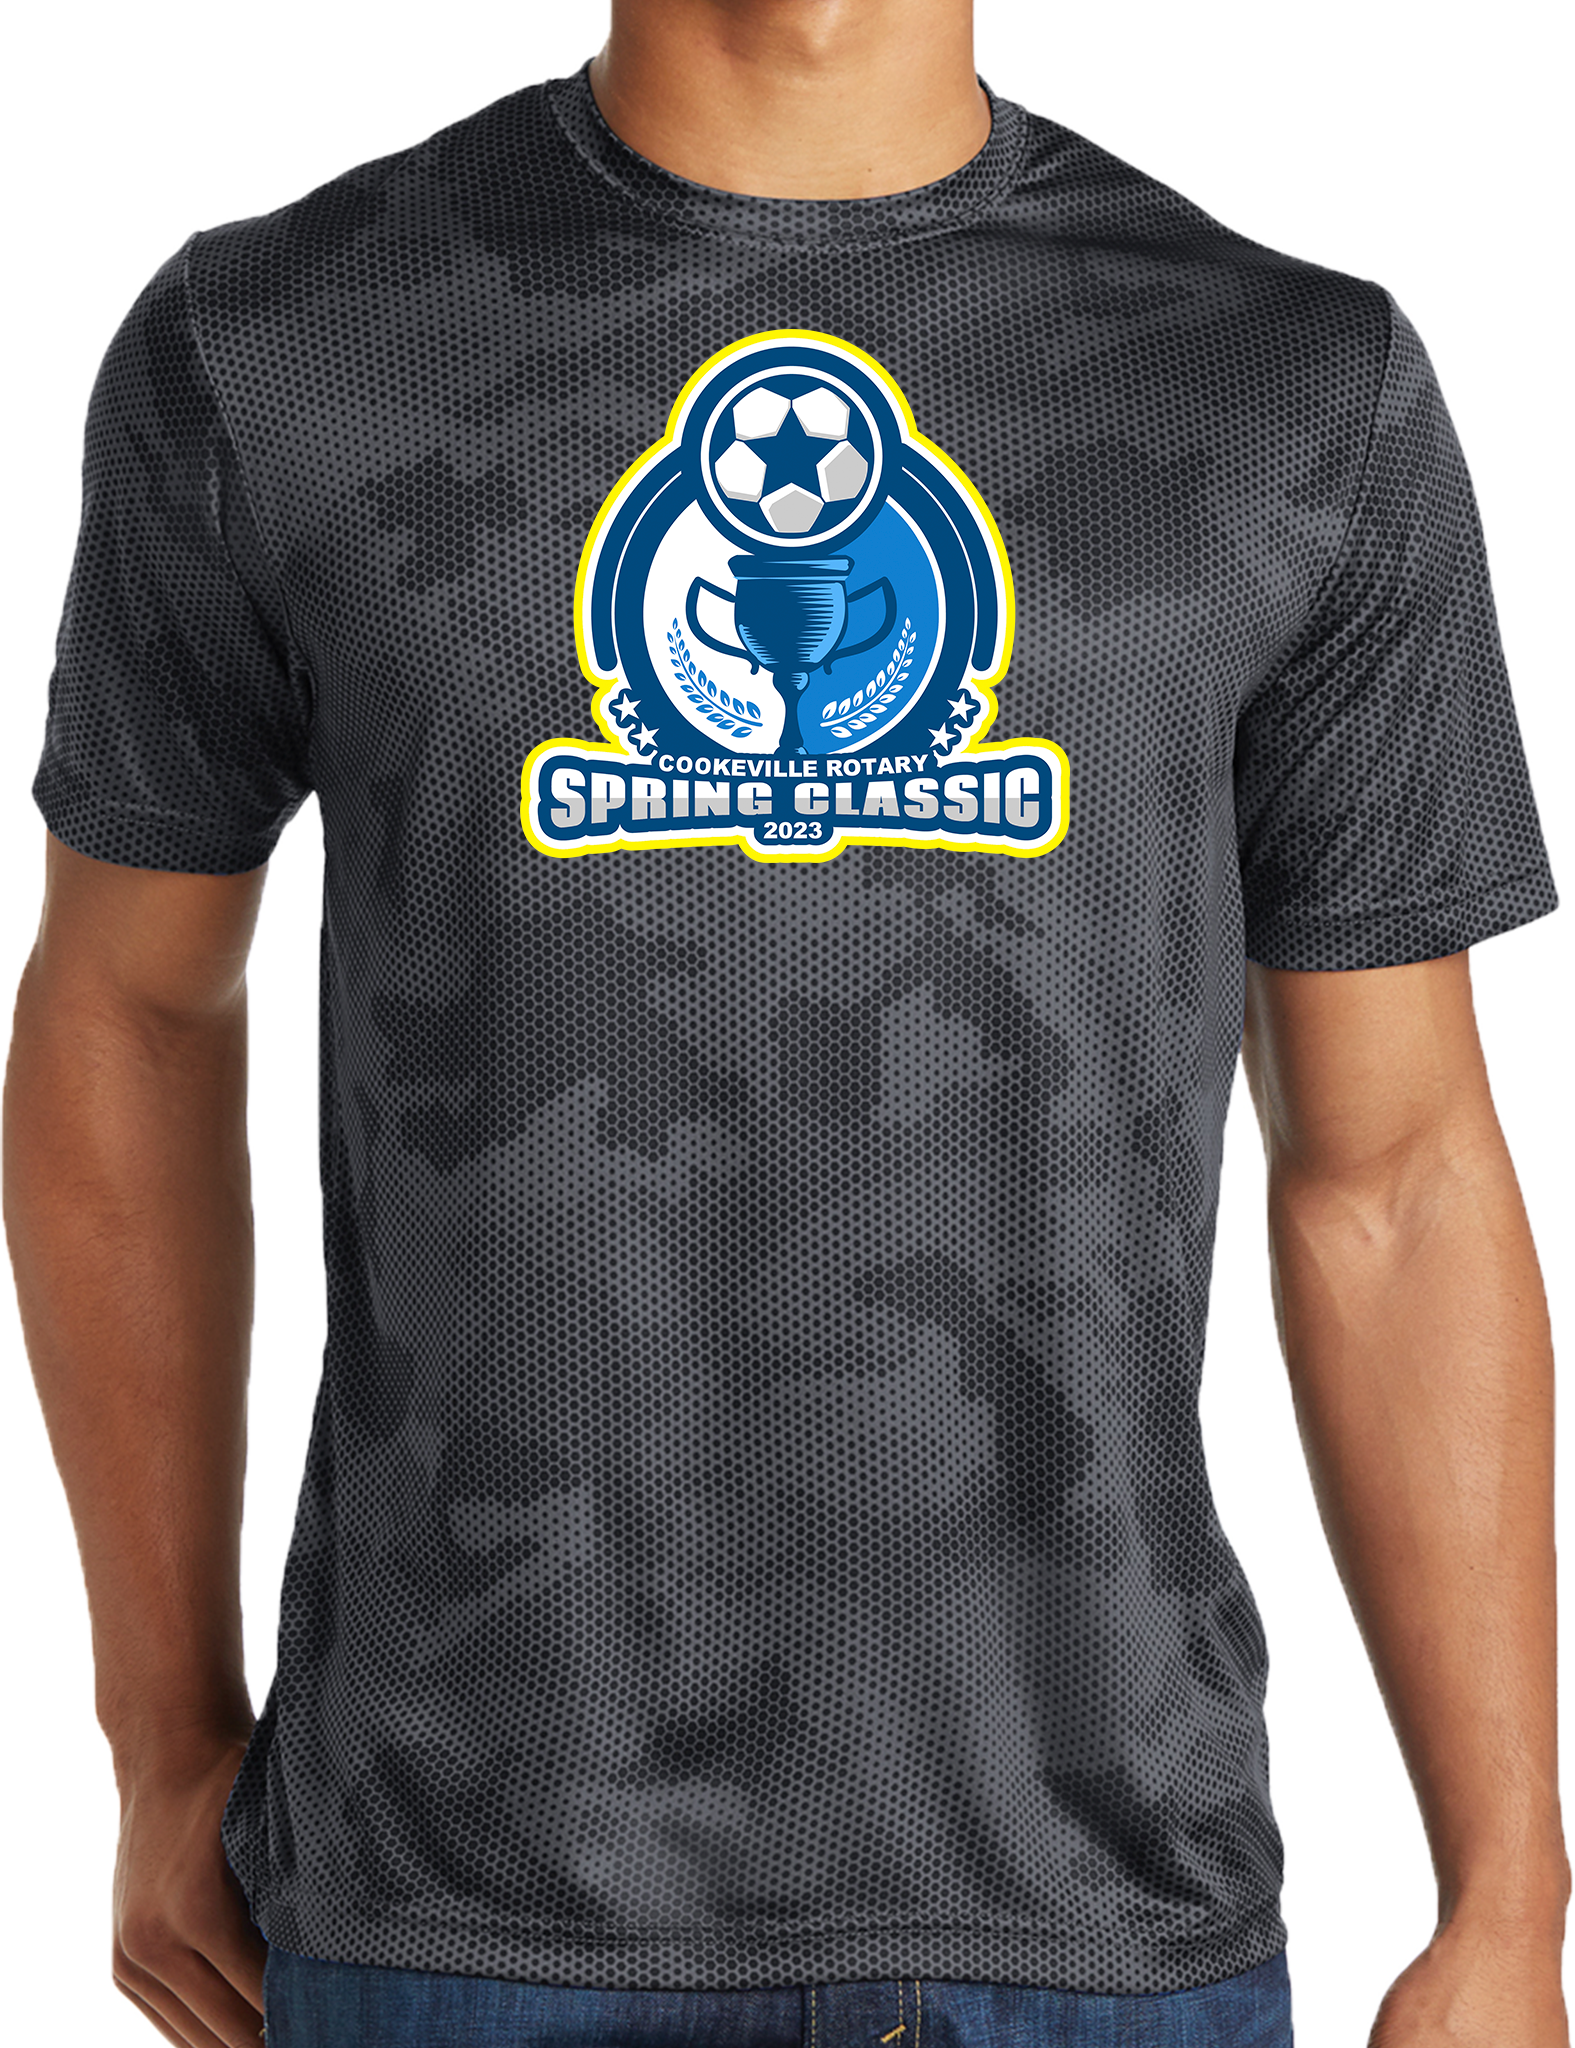 PERFORMANCE SHIRTS - 2023 Cookesville Rotary Soccer Classic